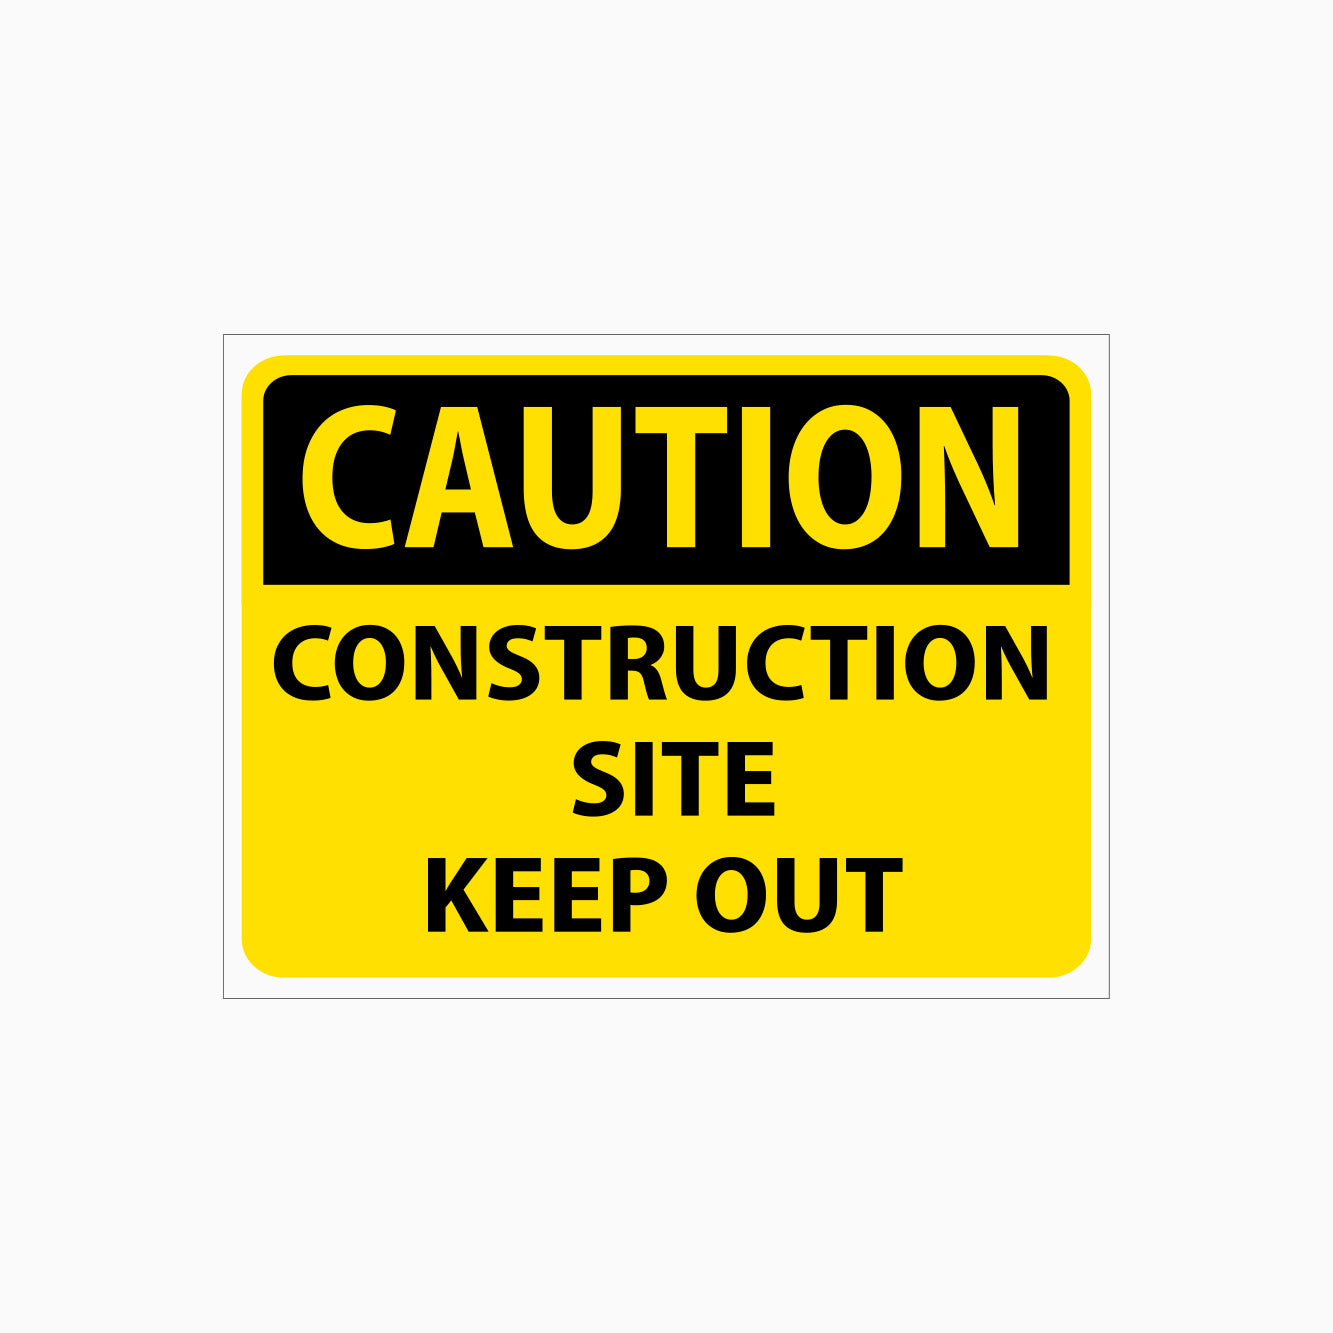 CAUTION CONSTRUCTION SITE - KEEP OUT SIGN